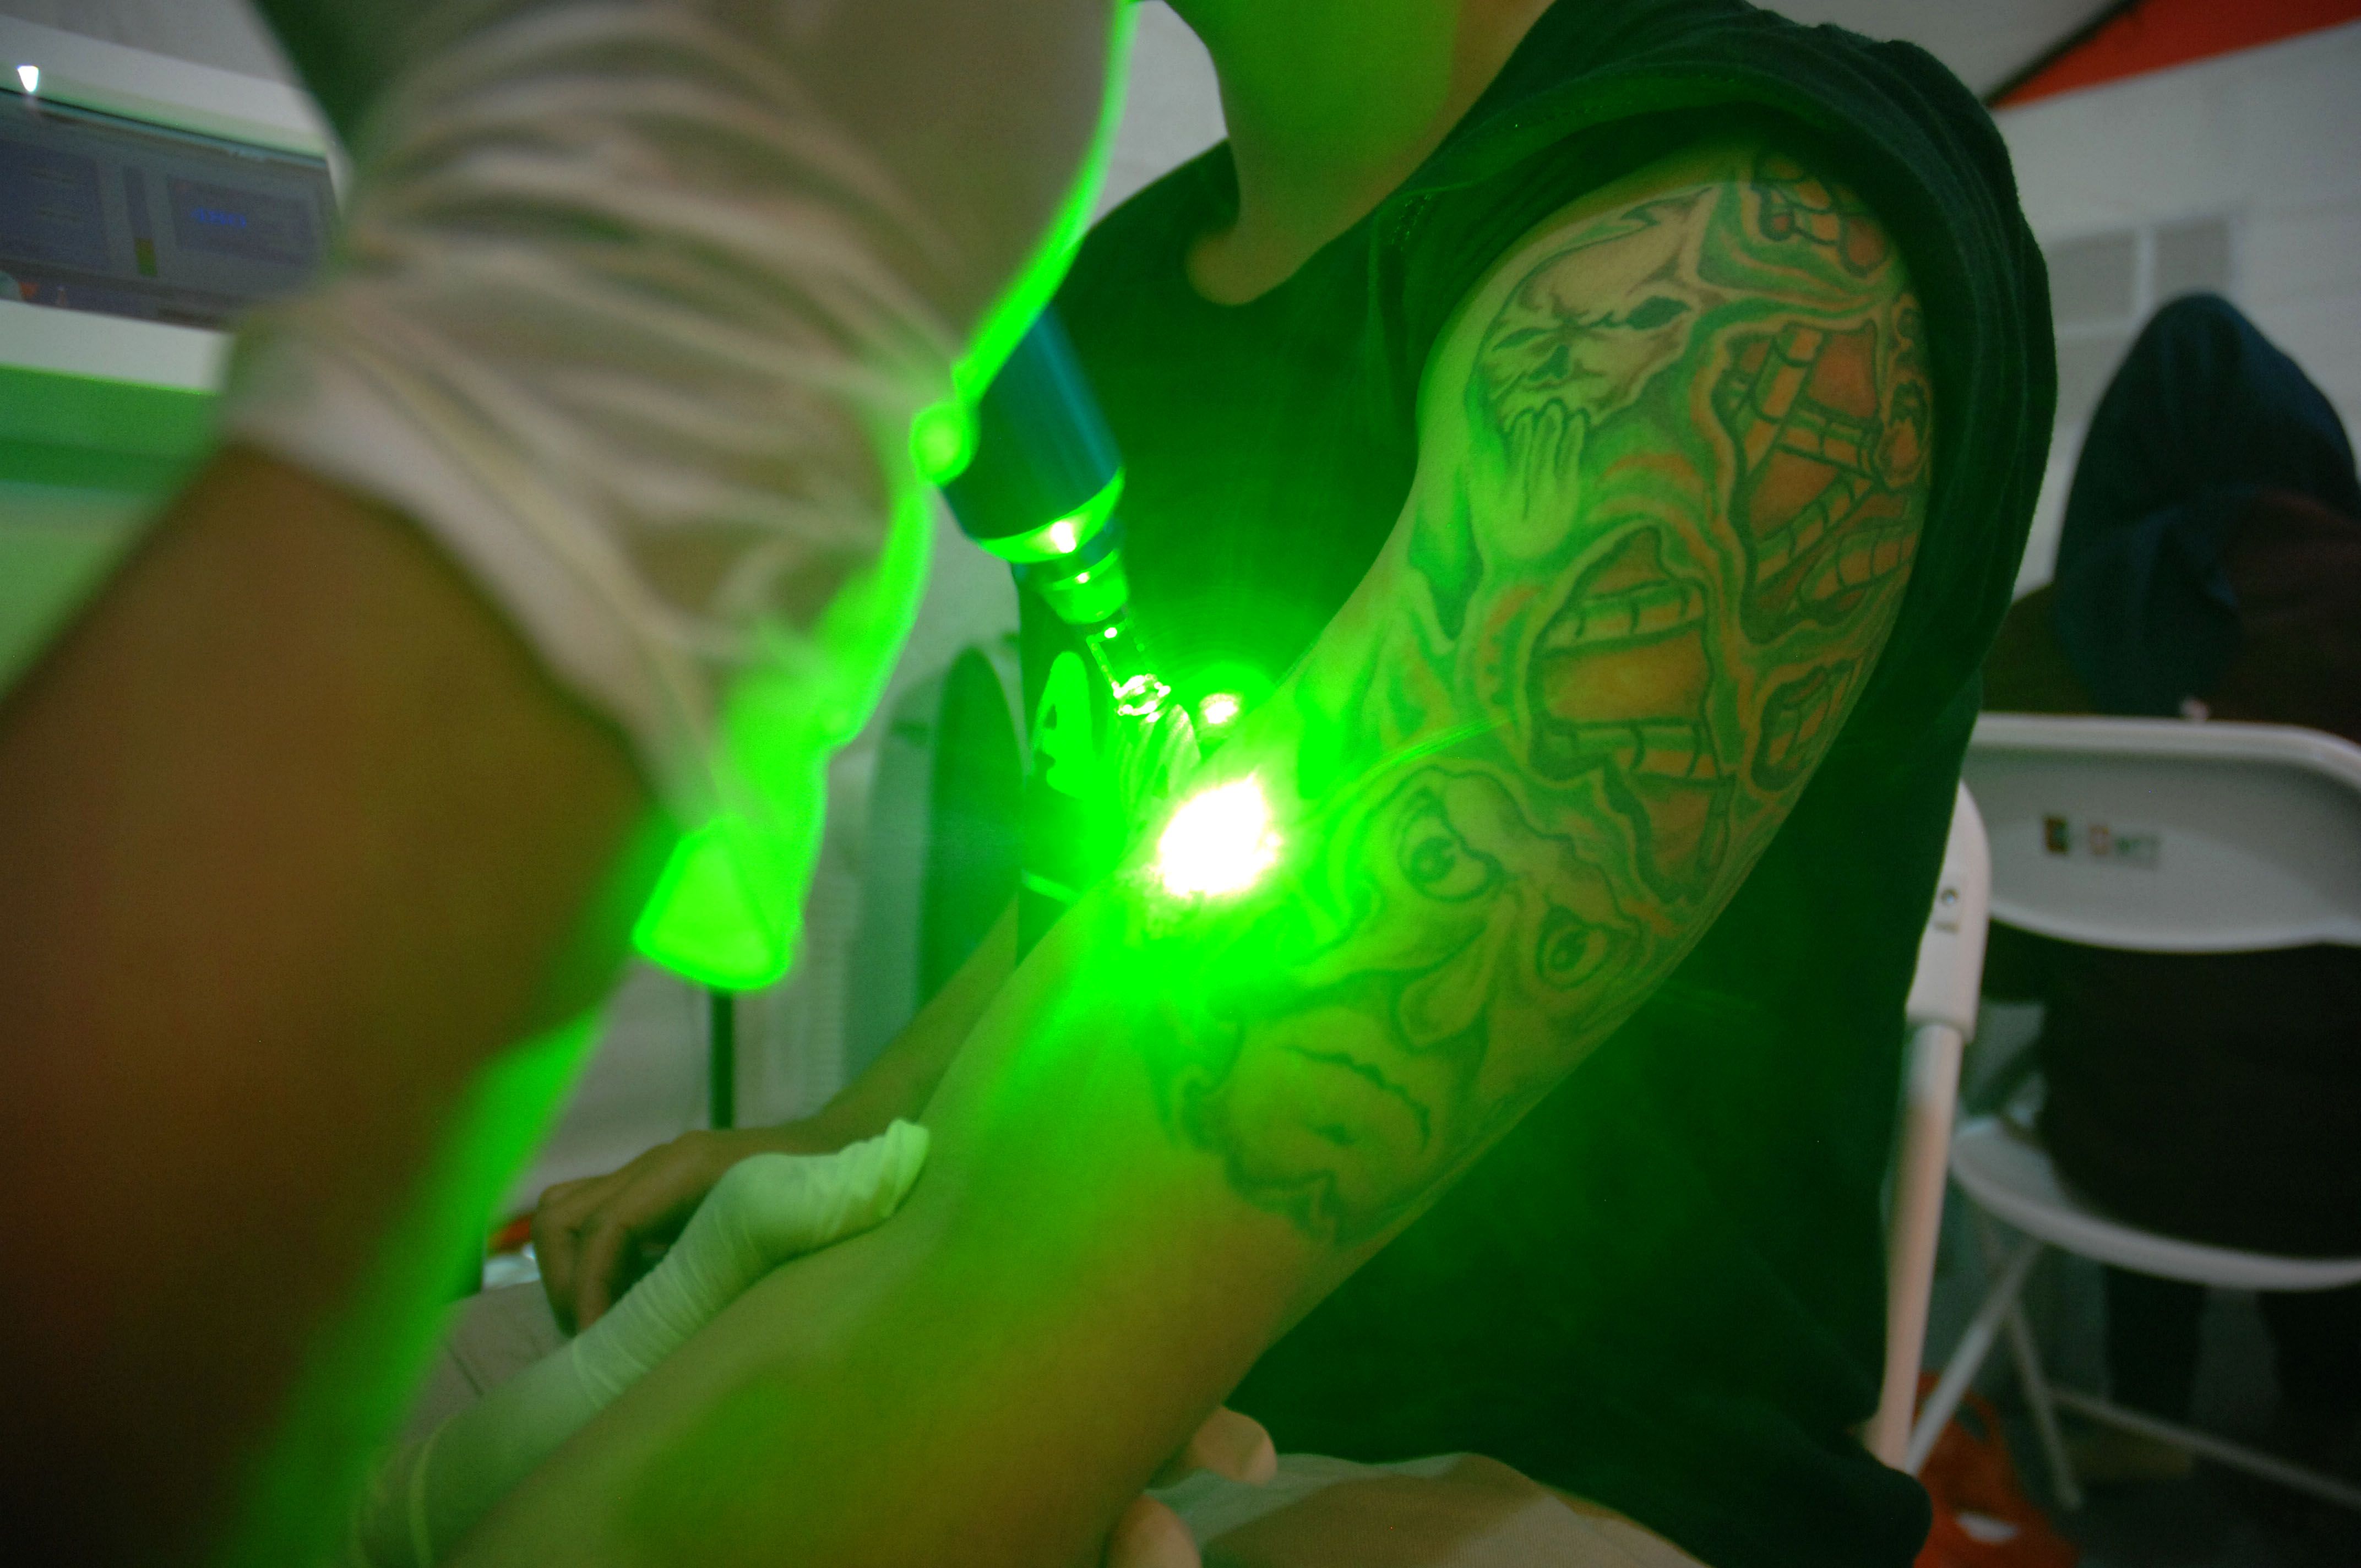 Tattoo Removal Training Scottsdale  National Laser Institute